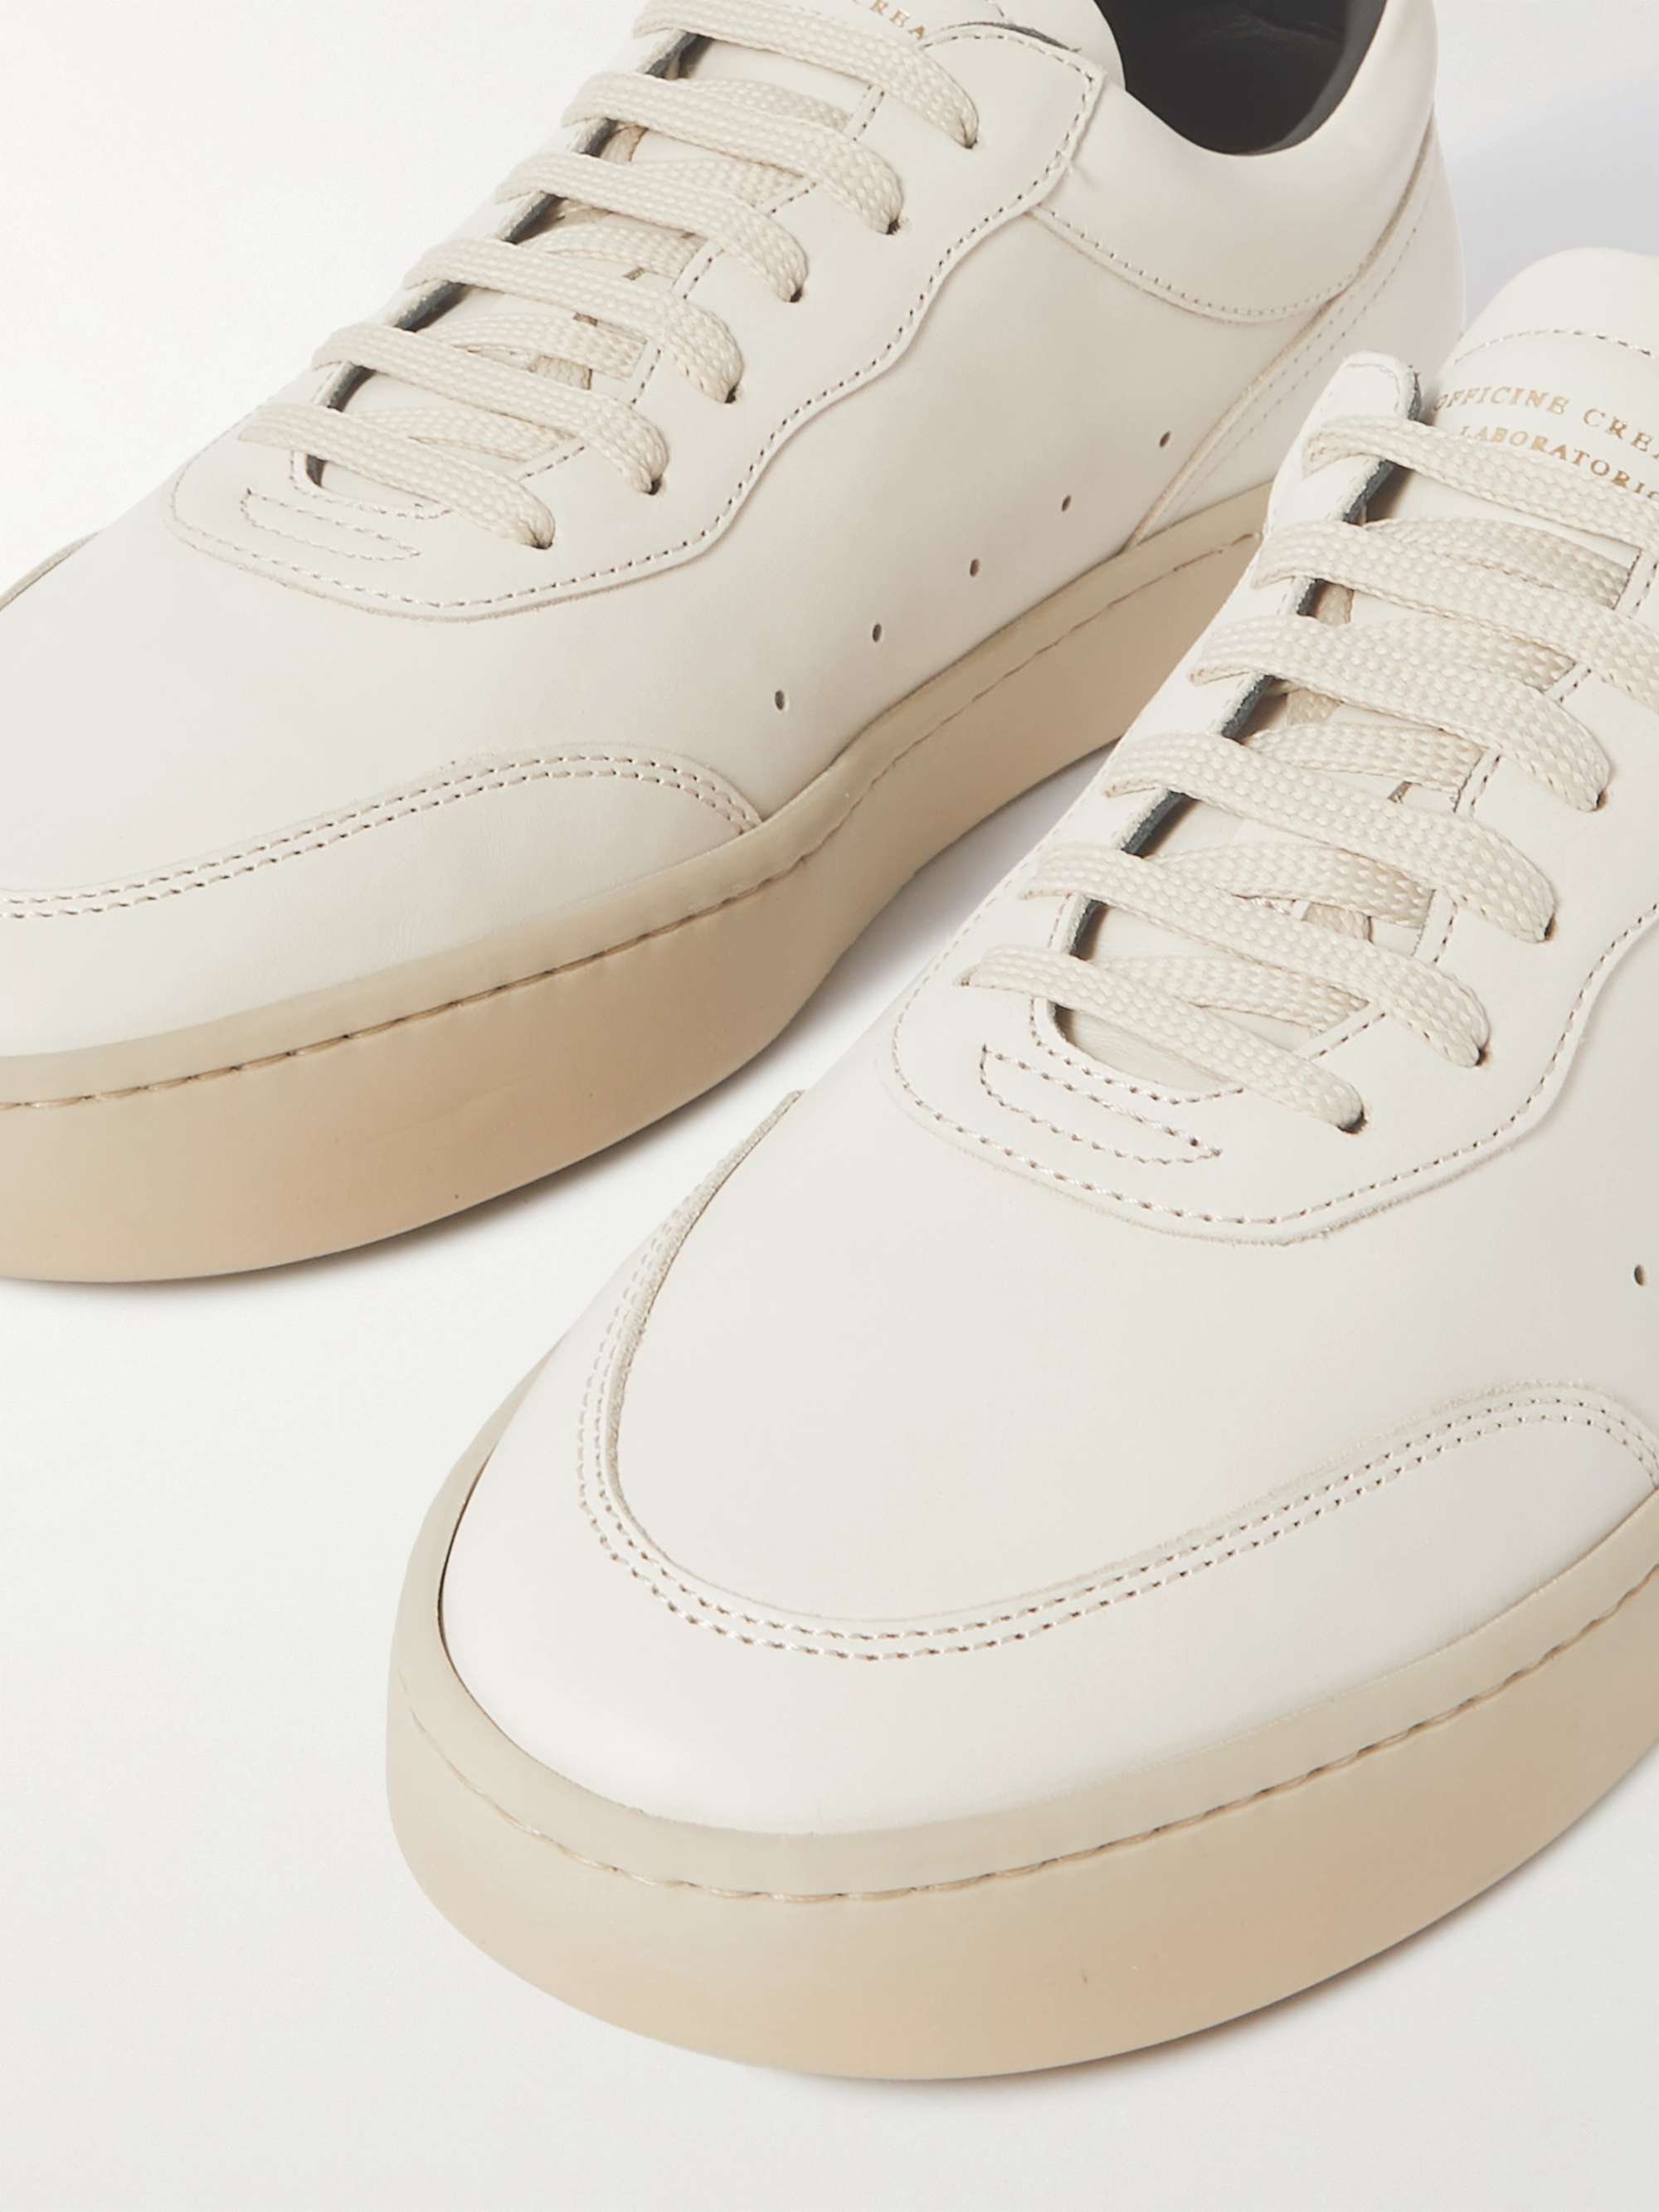 OFFICINE CREATIVE Kyle Lux 001 Leather Sneakers for Men | MR PORTER